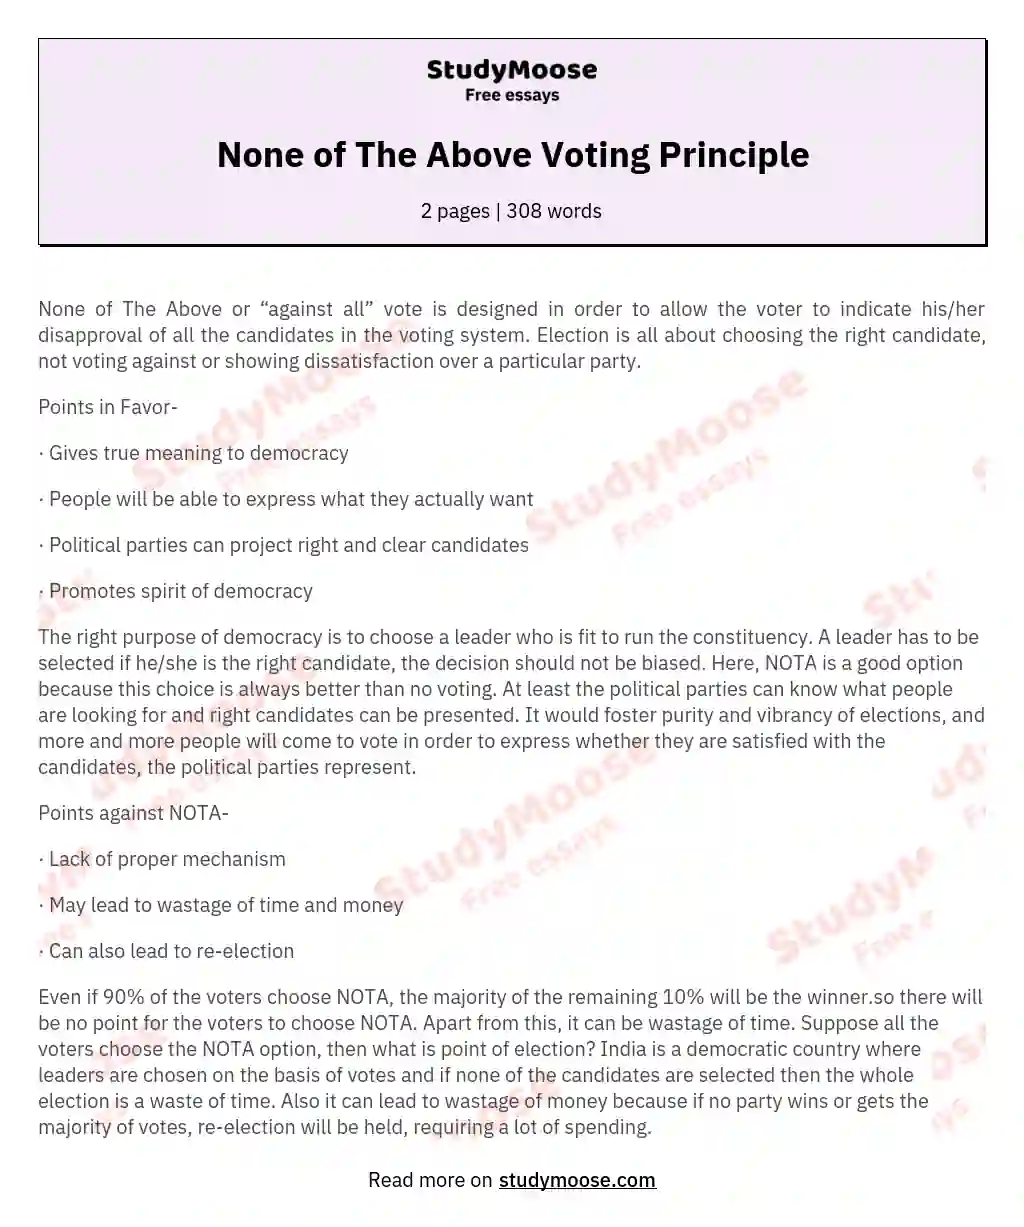 None of The Above Voting Principle essay